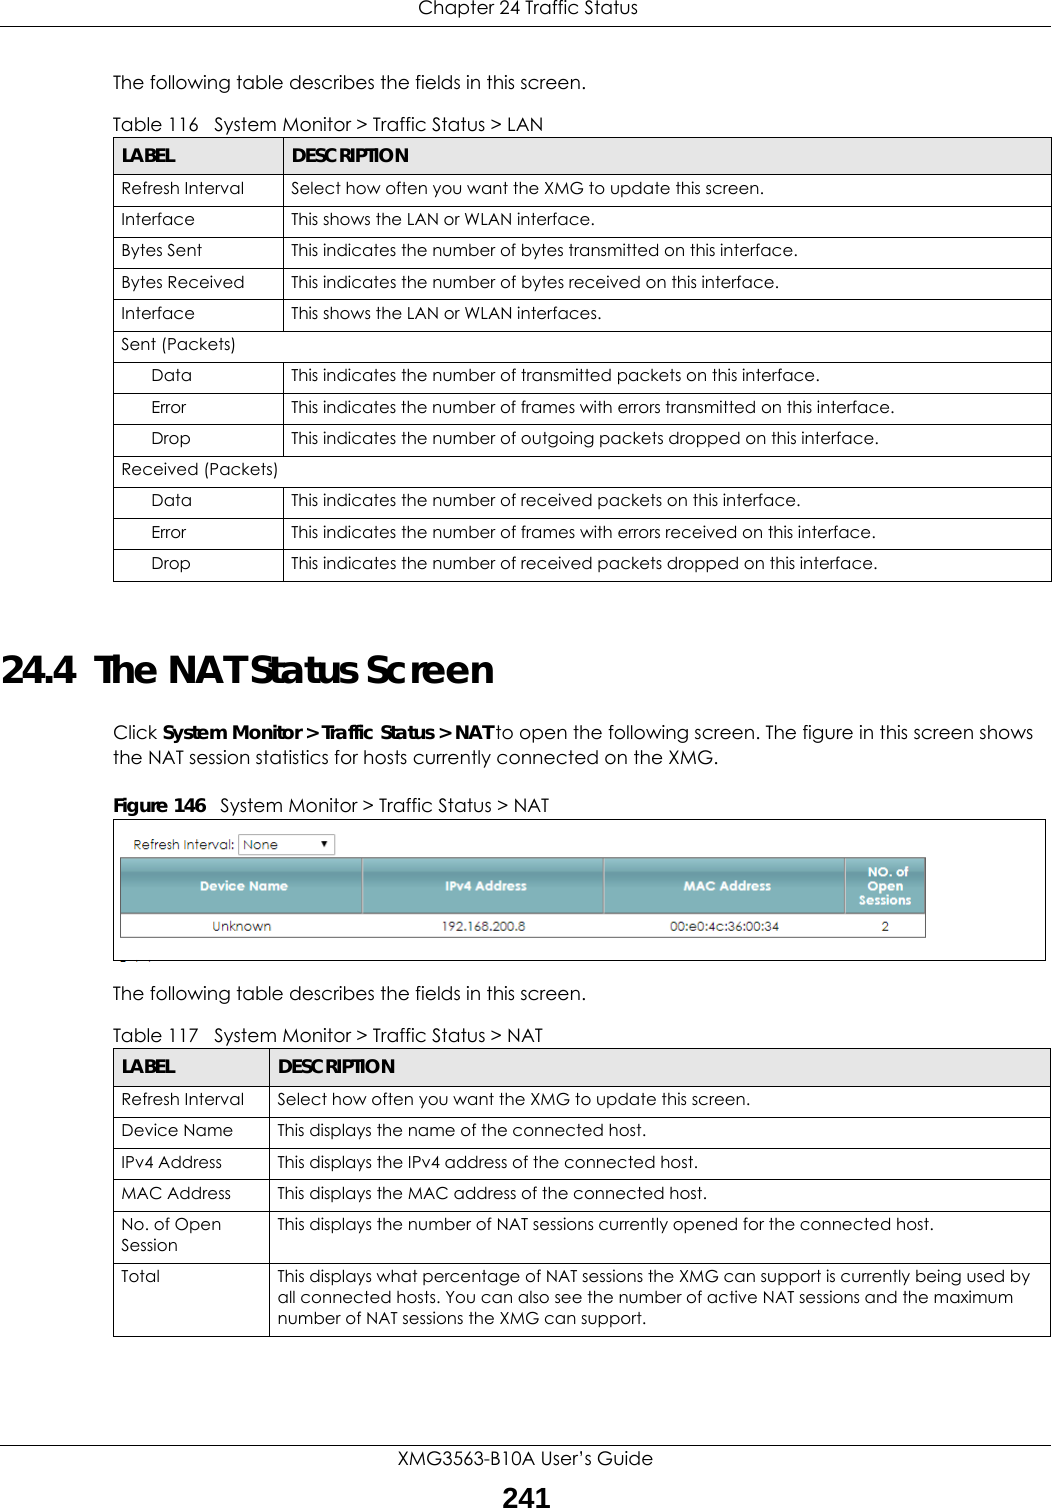  Chapter 24 Traffic StatusXMG3563-B10A User’s Guide241The following table describes the fields in this screen.    24.4  The NAT Status ScreenClick System Monitor &gt; Traffic Status &gt; NAT to open the following screen. The figure in this screen shows the NAT session statistics for hosts currently connected on the XMG.Figure 146   System Monitor &gt; Traffic Status &gt; NAT  The following table describes the fields in this screen.   Table 116   System Monitor &gt; Traffic Status &gt; LANLABEL DESCRIPTIONRefresh Interval Select how often you want the XMG to update this screen.Interface This shows the LAN or WLAN interface. Bytes Sent This indicates the number of bytes transmitted on this interface.Bytes Received This indicates the number of bytes received on this interface.Interface This shows the LAN or WLAN interfaces.Sent (Packets)Data  This indicates the number of transmitted packets on this interface.Error This indicates the number of frames with errors transmitted on this interface.Drop This indicates the number of outgoing packets dropped on this interface.Received (Packets)Data  This indicates the number of received packets on this interface.Error This indicates the number of frames with errors received on this interface.Drop This indicates the number of received packets dropped on this interface.Table 117   System Monitor &gt; Traffic Status &gt; NATLABEL DESCRIPTIONRefresh Interval Select how often you want the XMG to update this screen.Device Name This displays the name of the connected host.IPv4 Address This displays the IPv4 address of the connected host.MAC Address This displays the MAC address of the connected host.No. of Open SessionThis displays the number of NAT sessions currently opened for the connected host.Total This displays what percentage of NAT sessions the XMG can support is currently being used by all connected hosts. You can also see the number of active NAT sessions and the maximum number of NAT sessions the XMG can support.